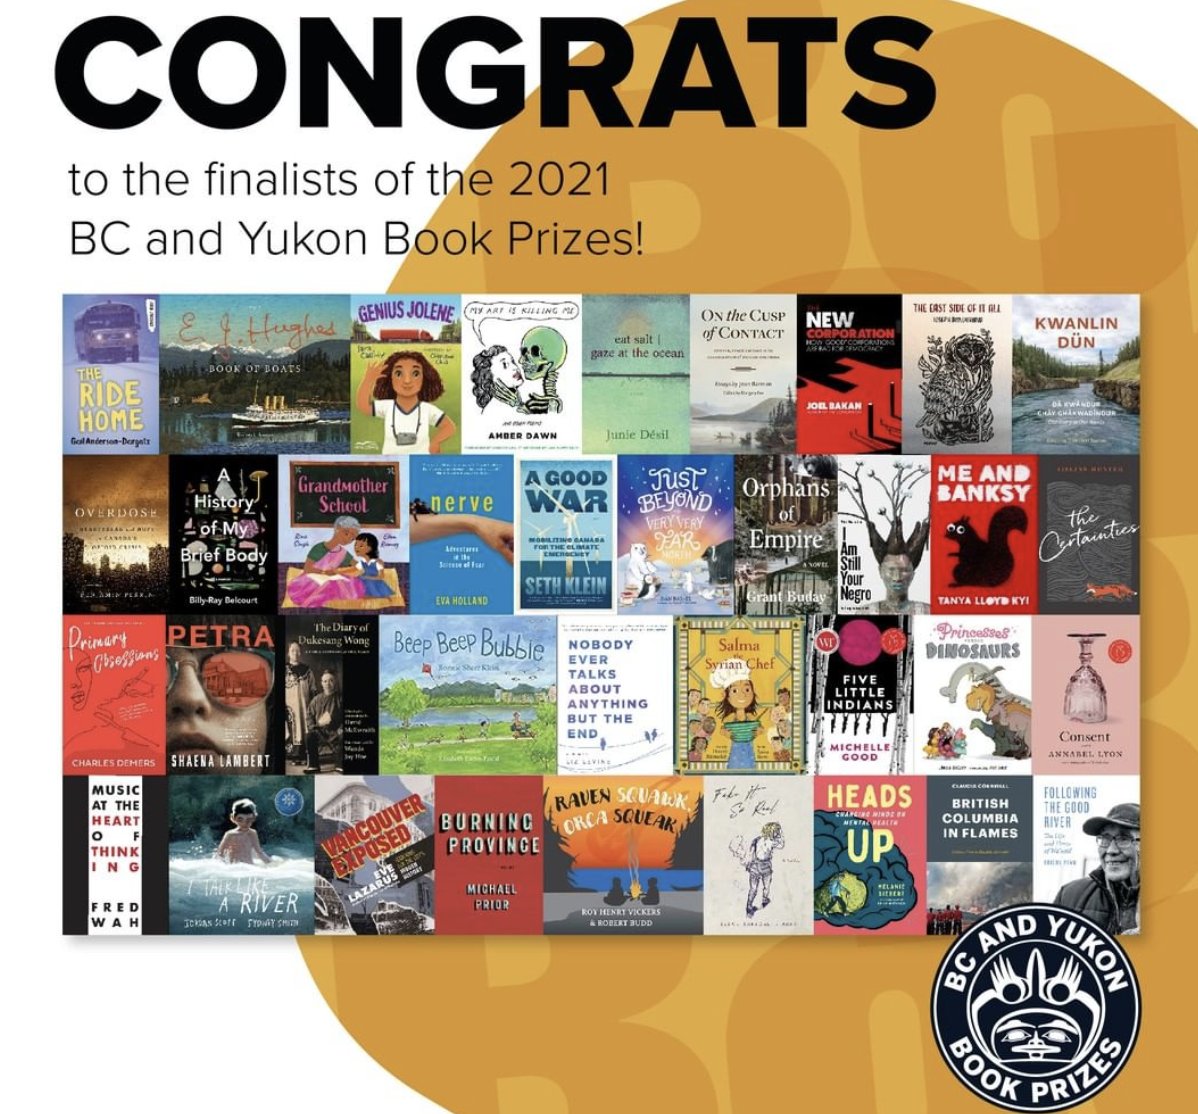 @RHVickers @lucky_budd Congratulations you guys on your shortlisted book #RavenSquawkOrcaSqueak! #BCWriters @BCArtists #bcyukonbookPrize